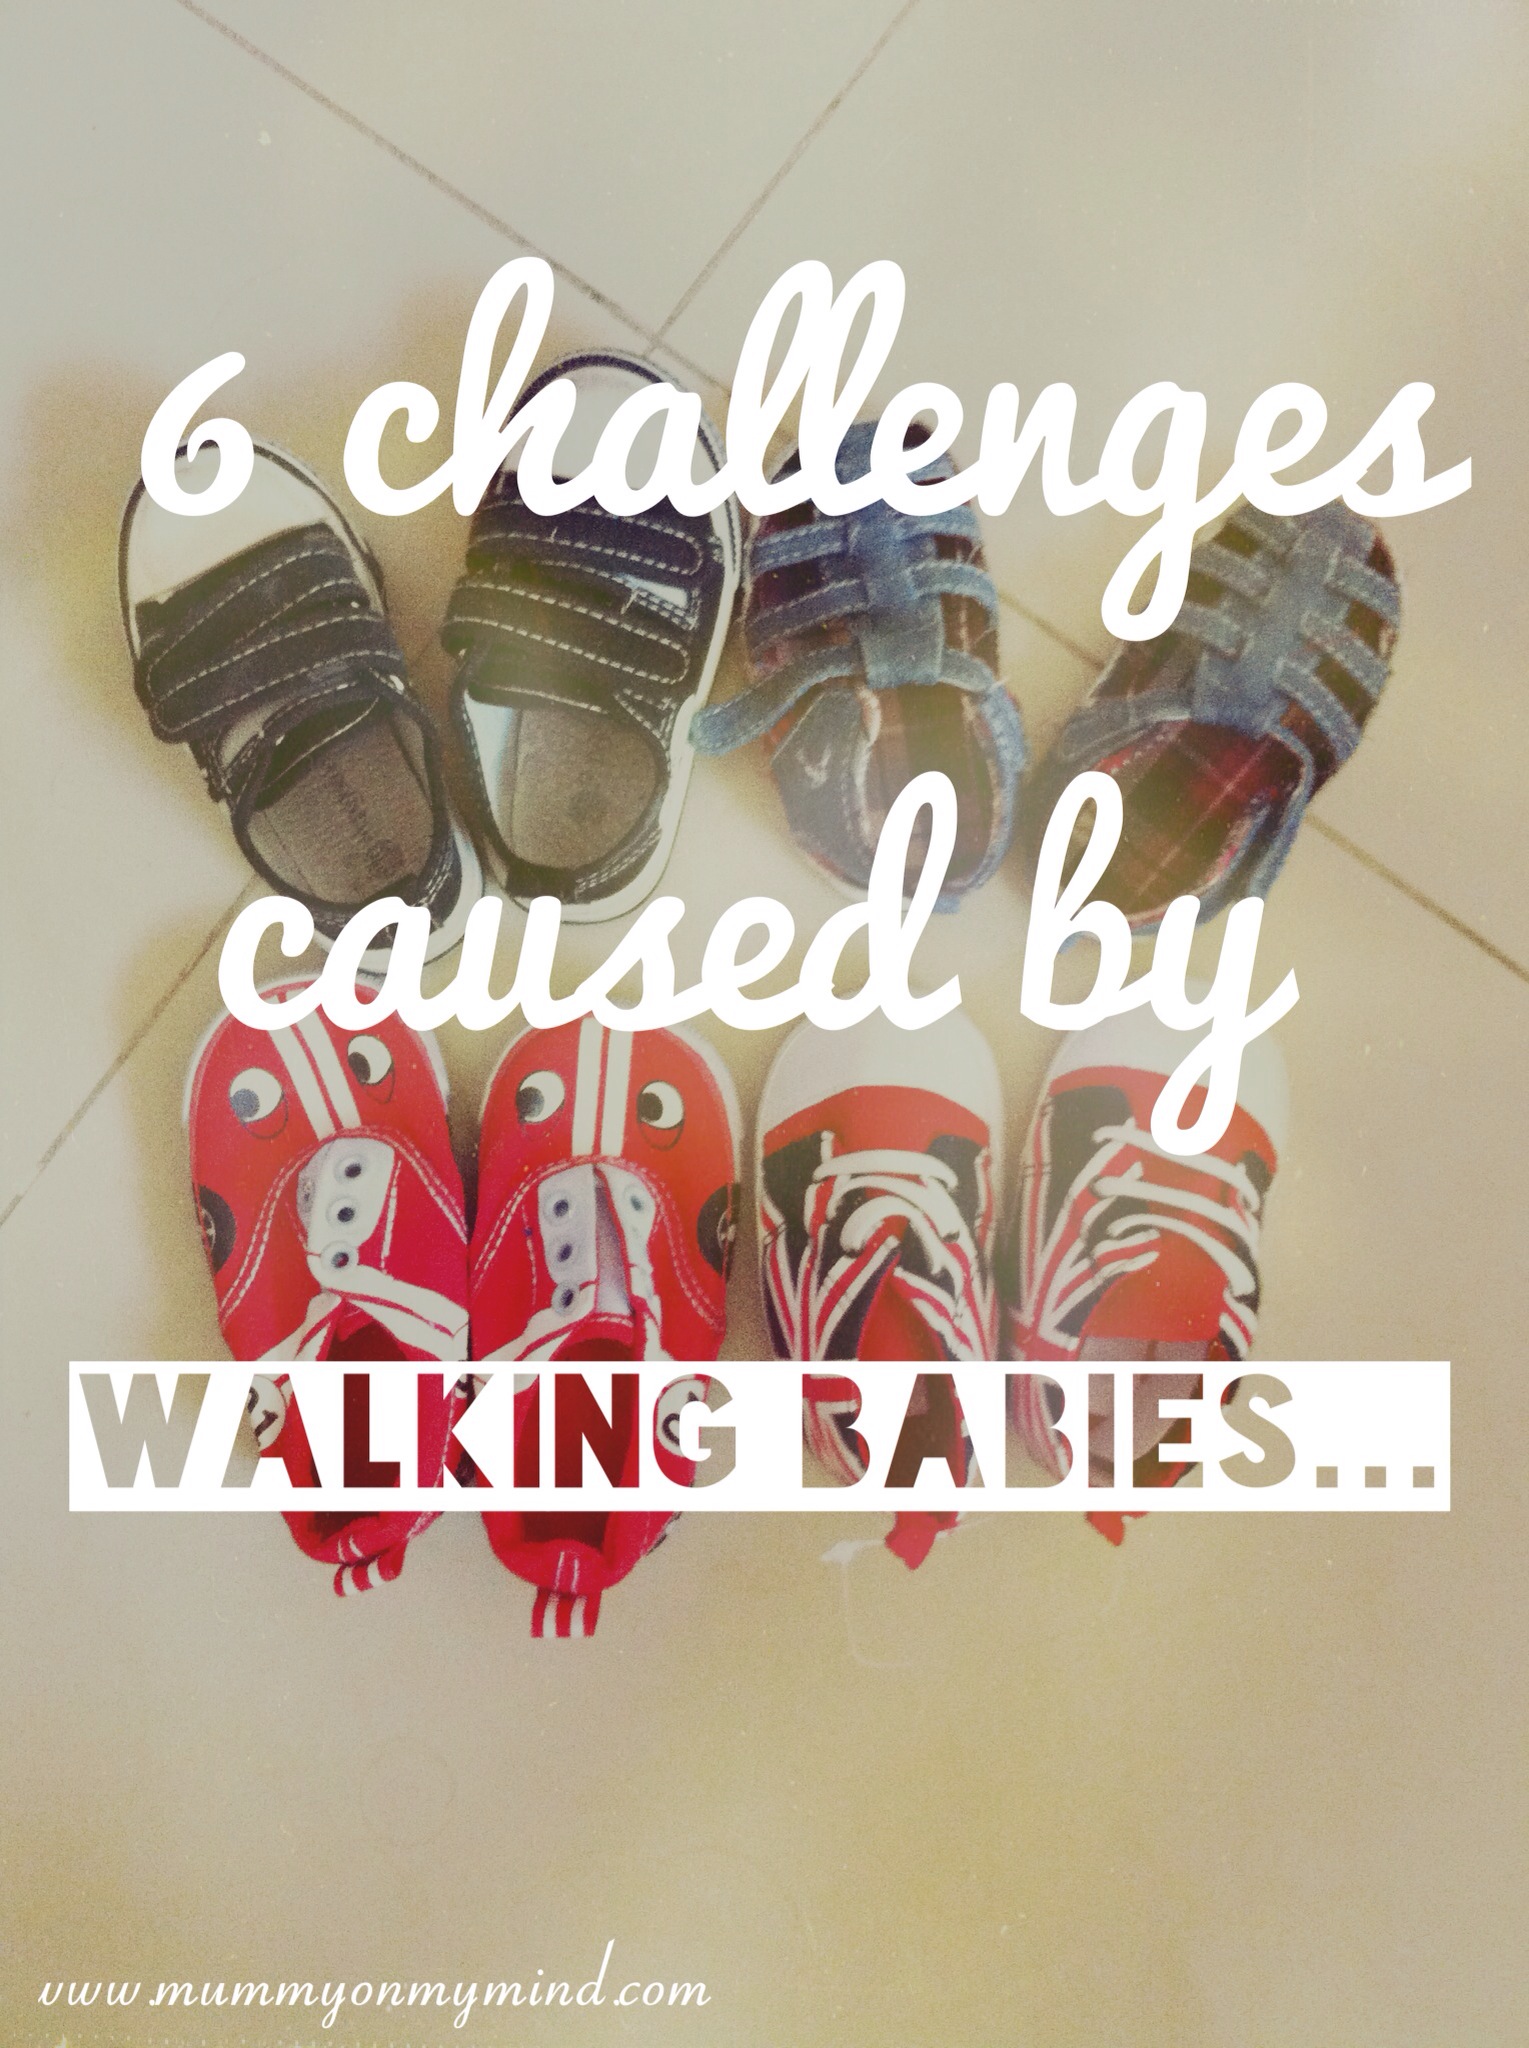 6 challenges caused by Walking Babies…